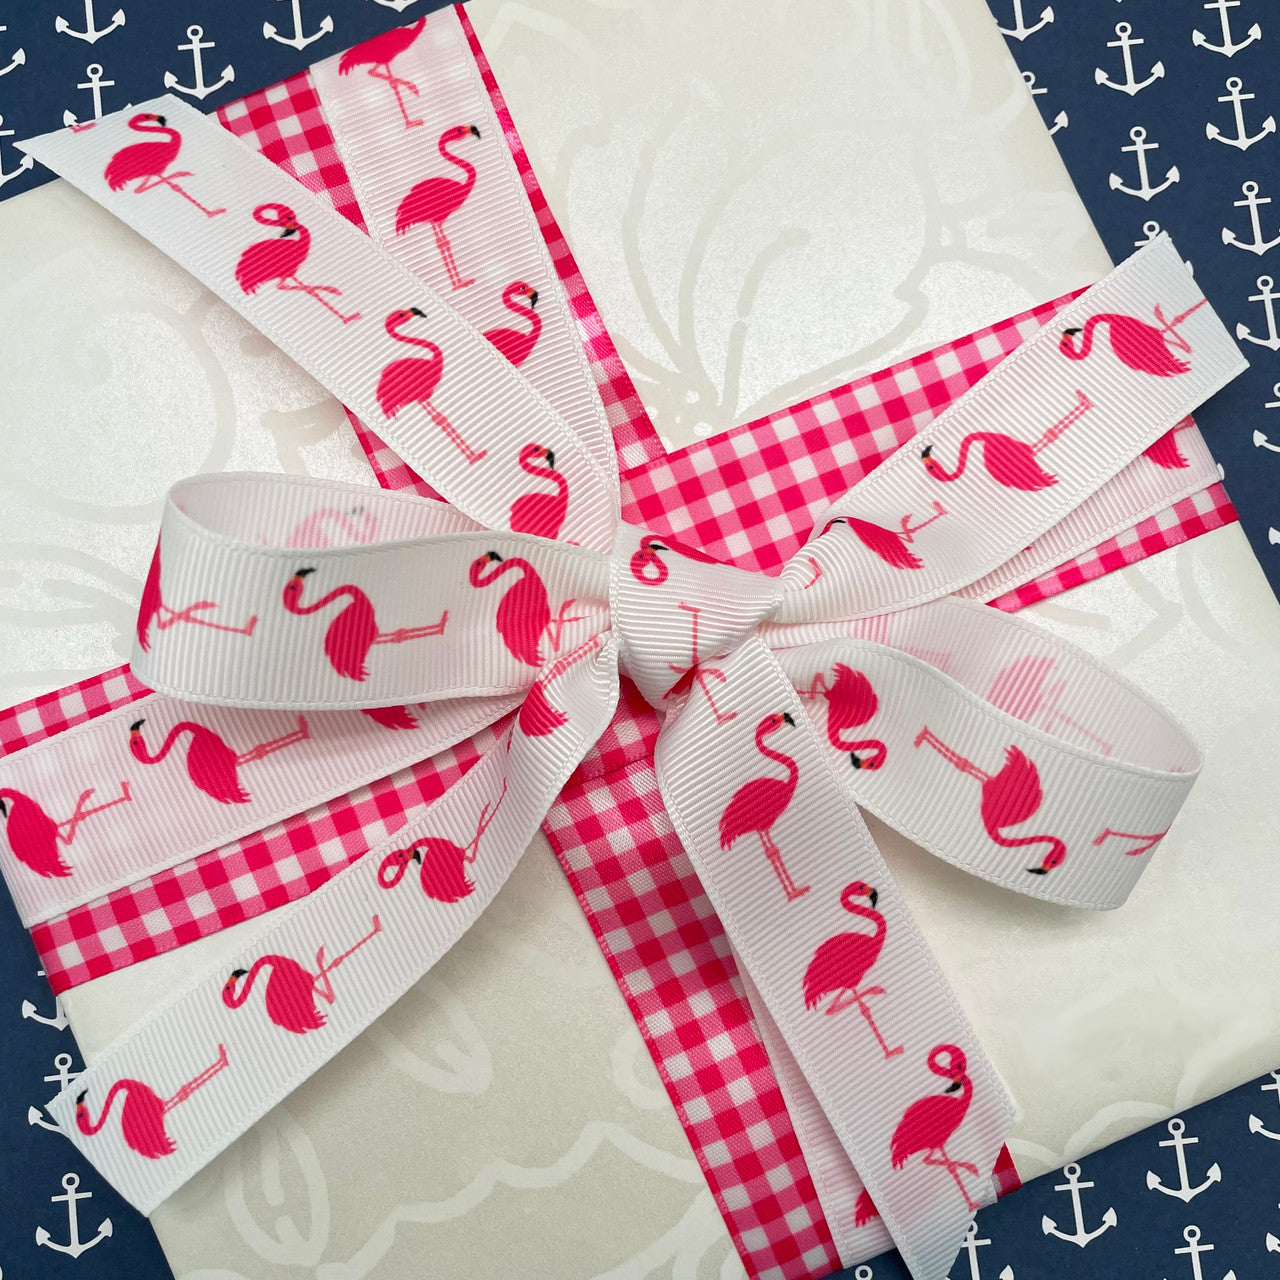 Mix and match our pink flamingos with pink and white gingham check for a fun  preppy gift or craft idea!